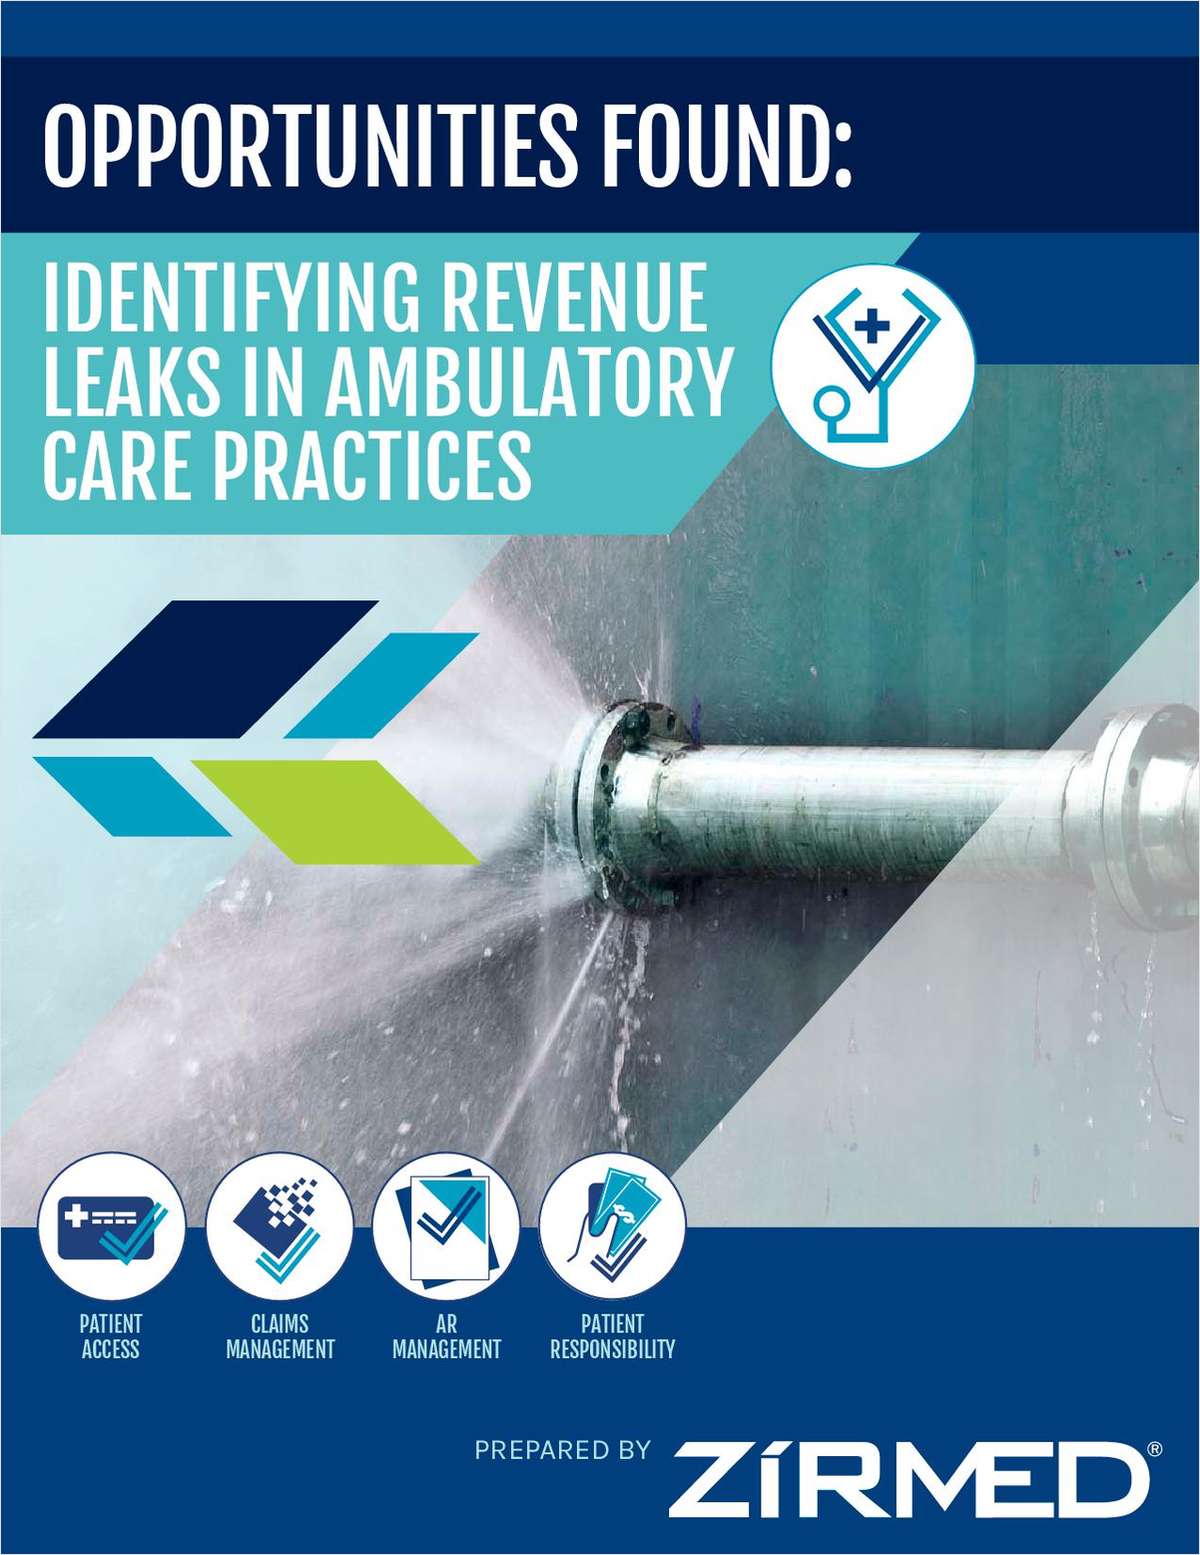 Opportunites Found: Identifying Revenue Leakage Leaks in Ambulatory Care Practices